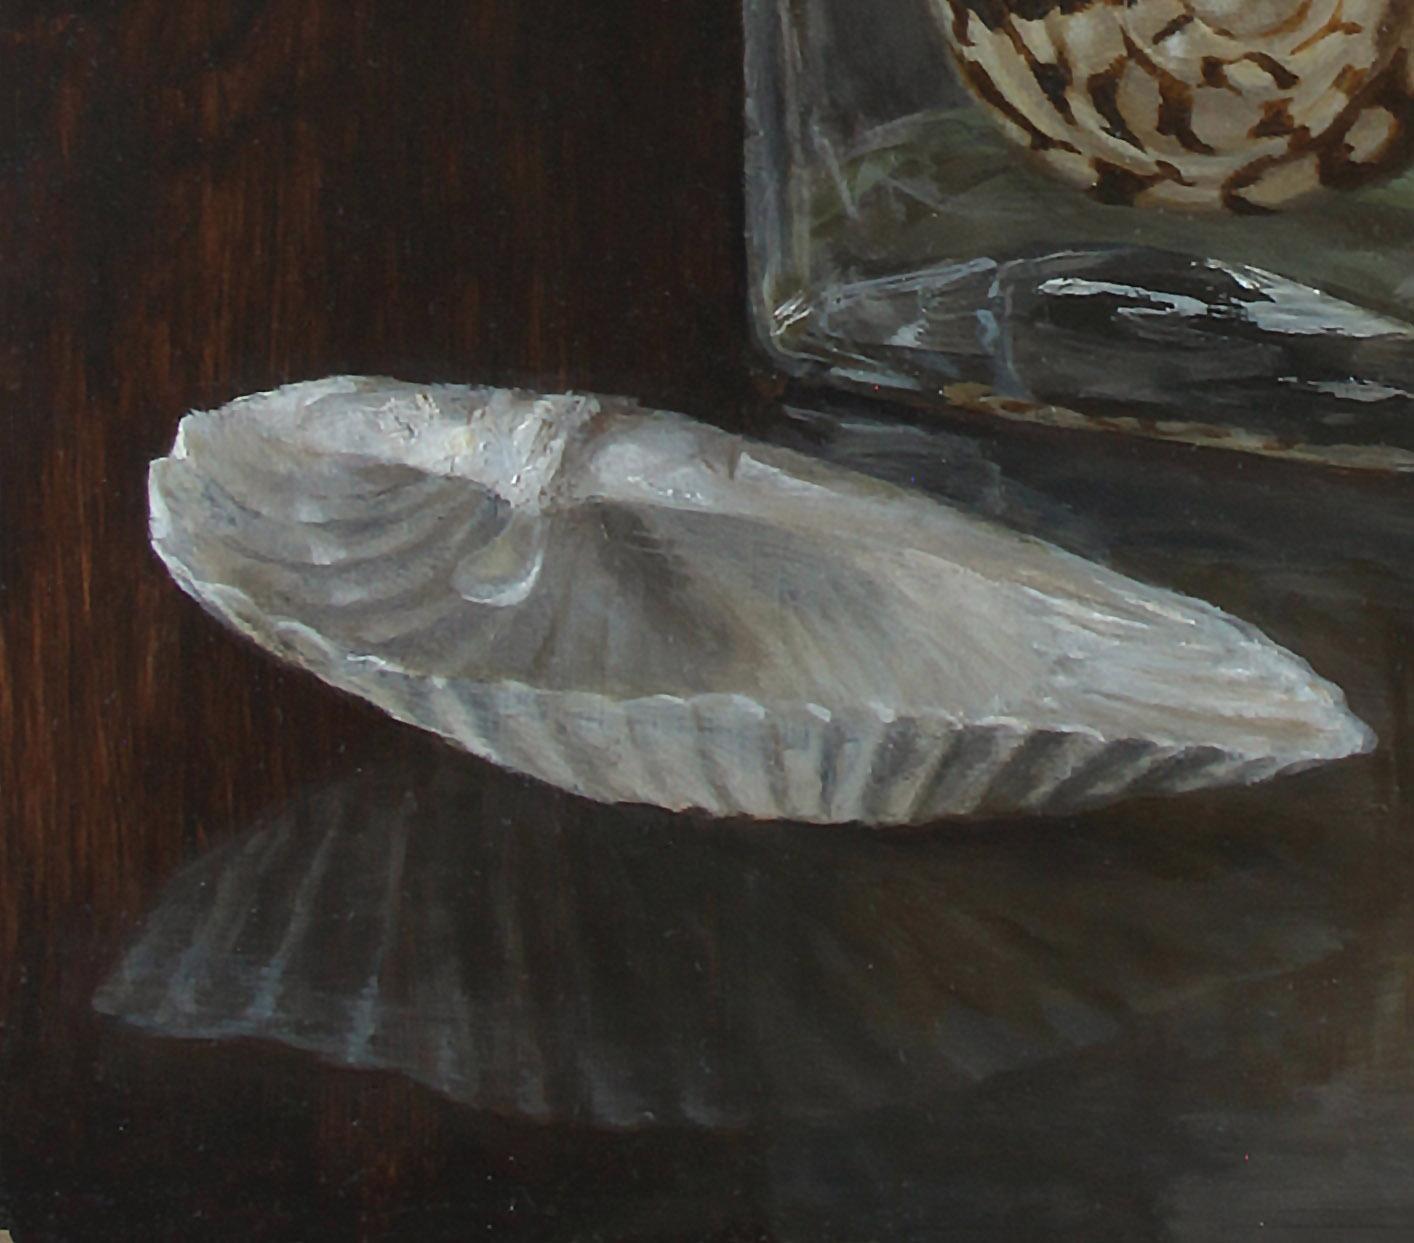 A water filled jar holds two seashells while a third has fallen to the table. The varied textures, shapes and colors of the three shells are rendered with careful detail, from the pale pink pearled interior to the brown spots of the immersed shell.